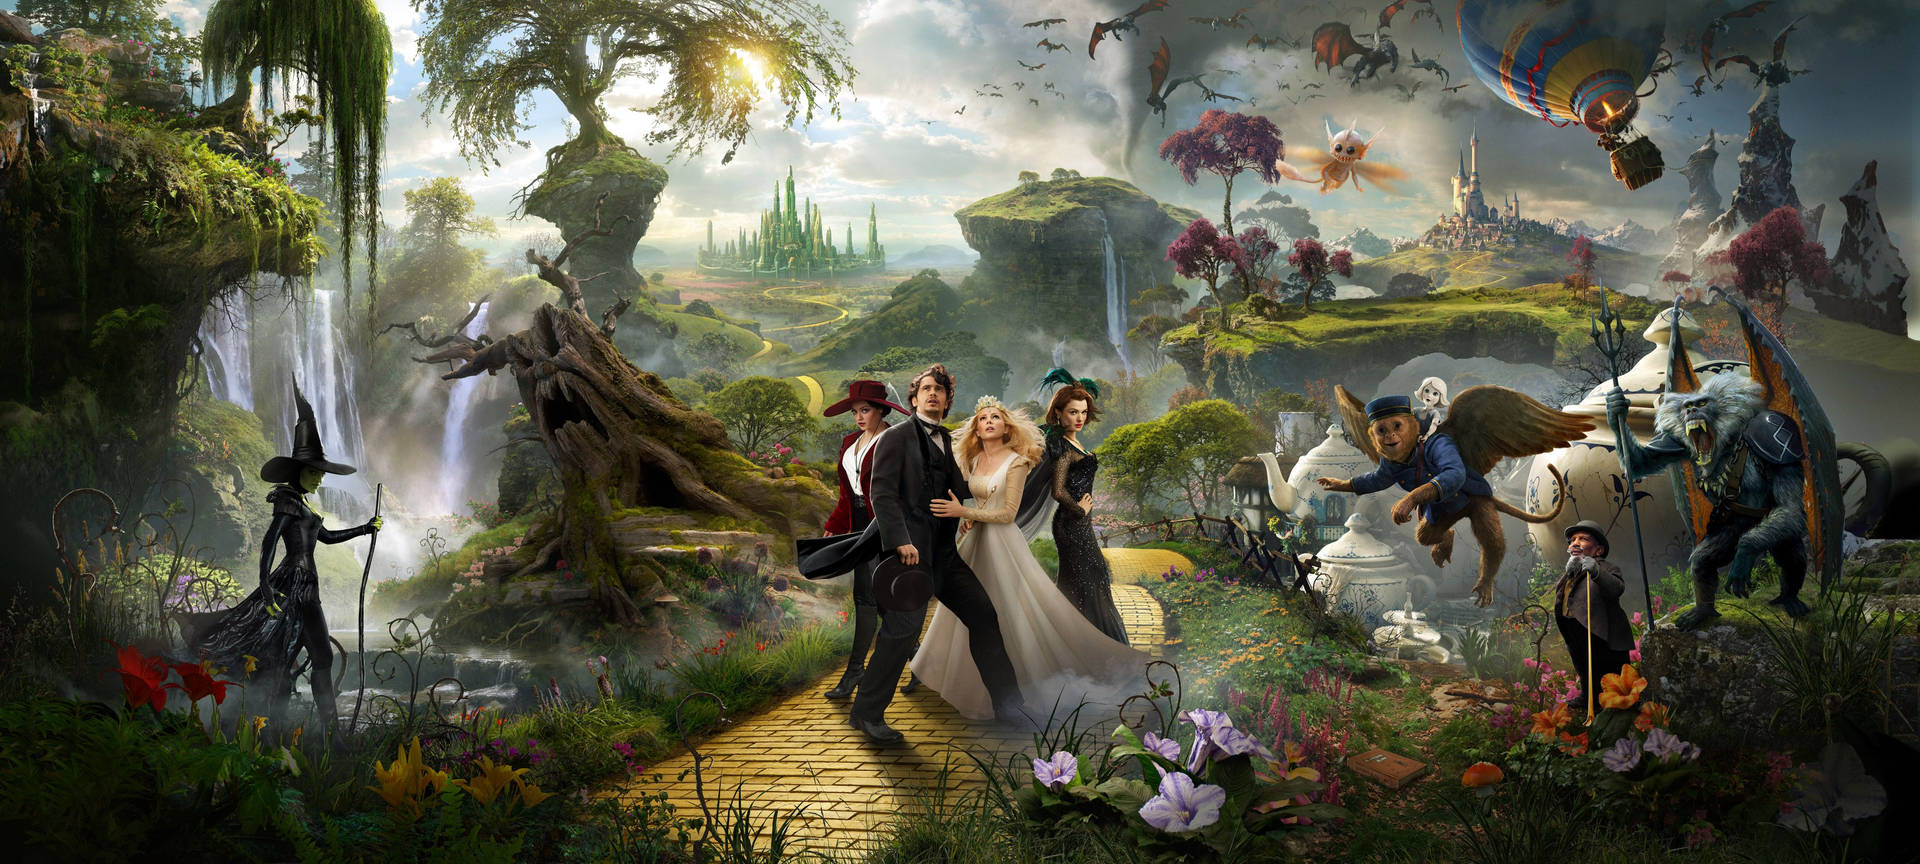 Oz The Great And Powerful Cast Wallpaper